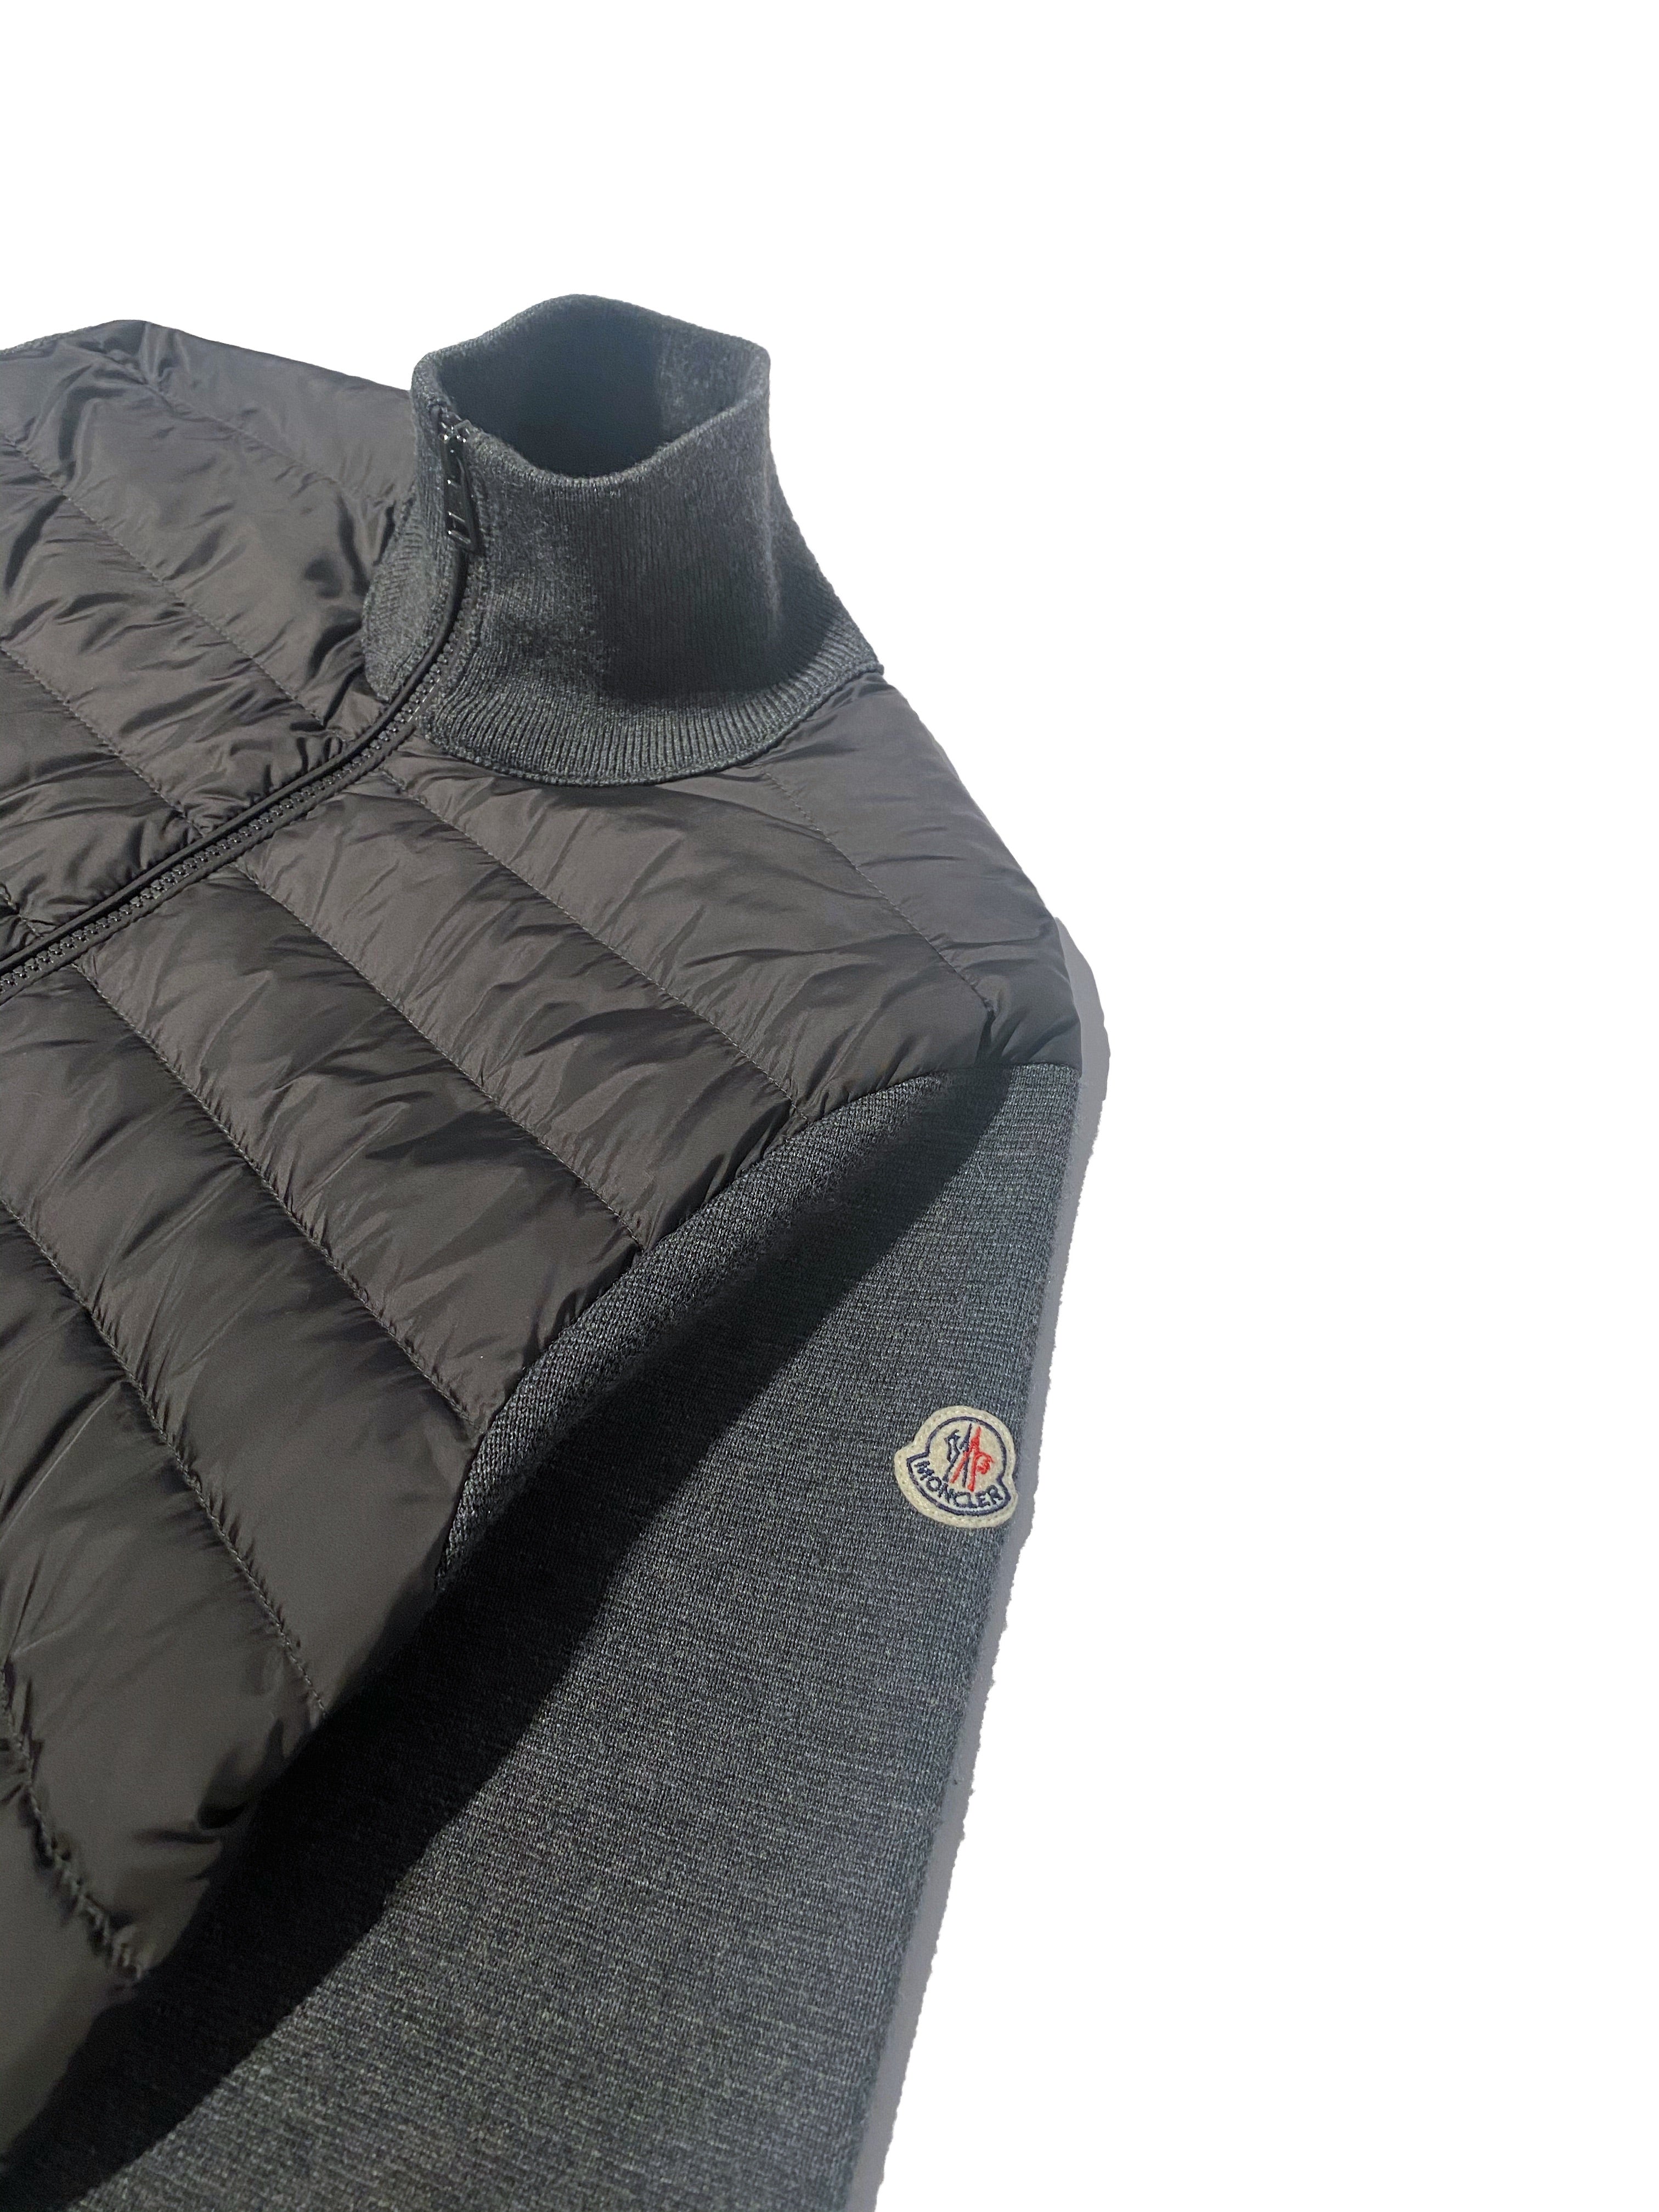 Moncler Padded Cardigan - Size S